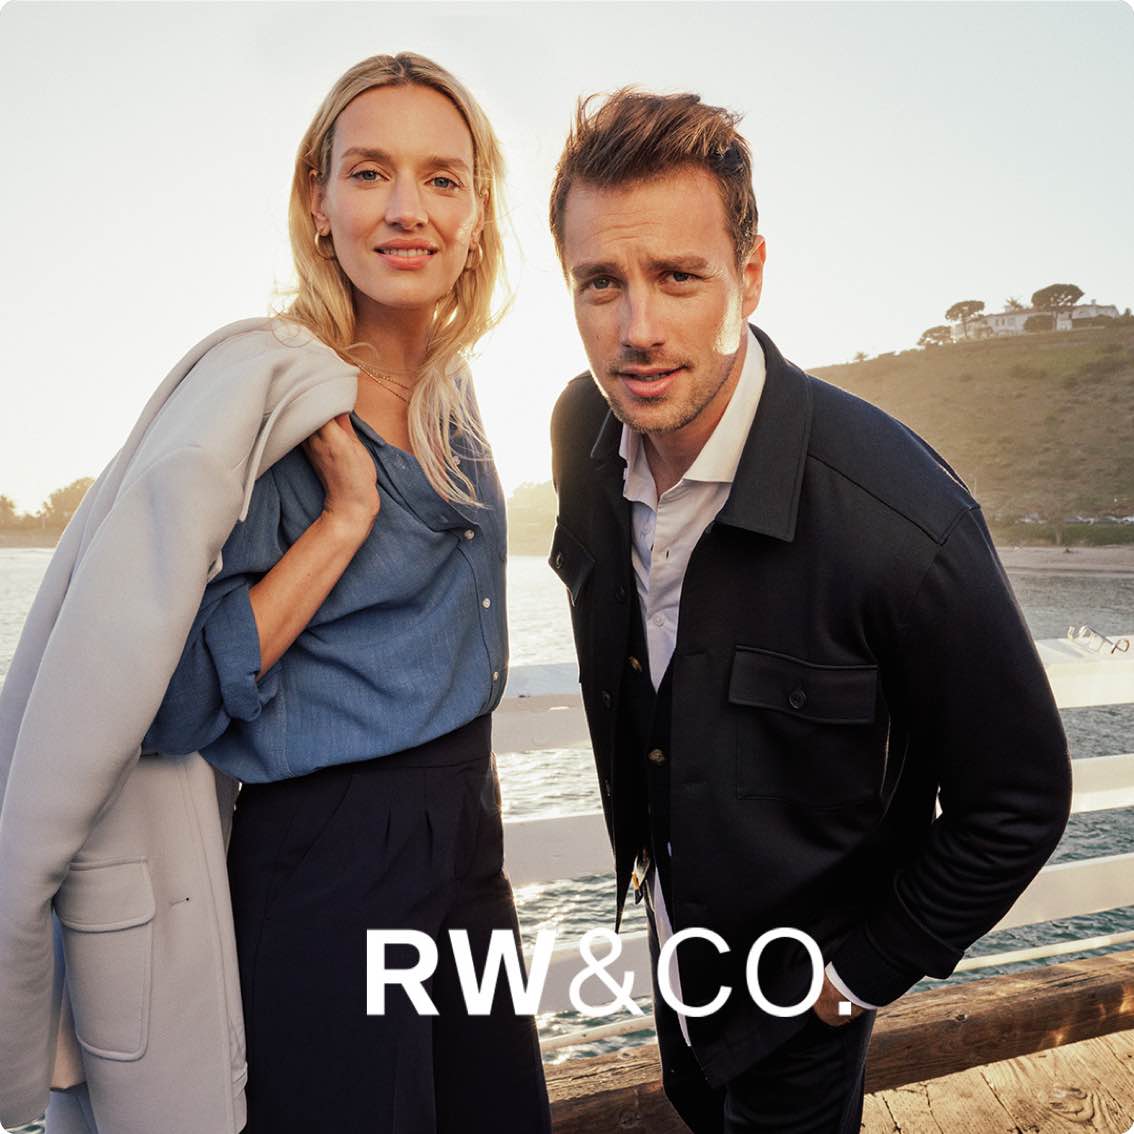 RW&CO. about us